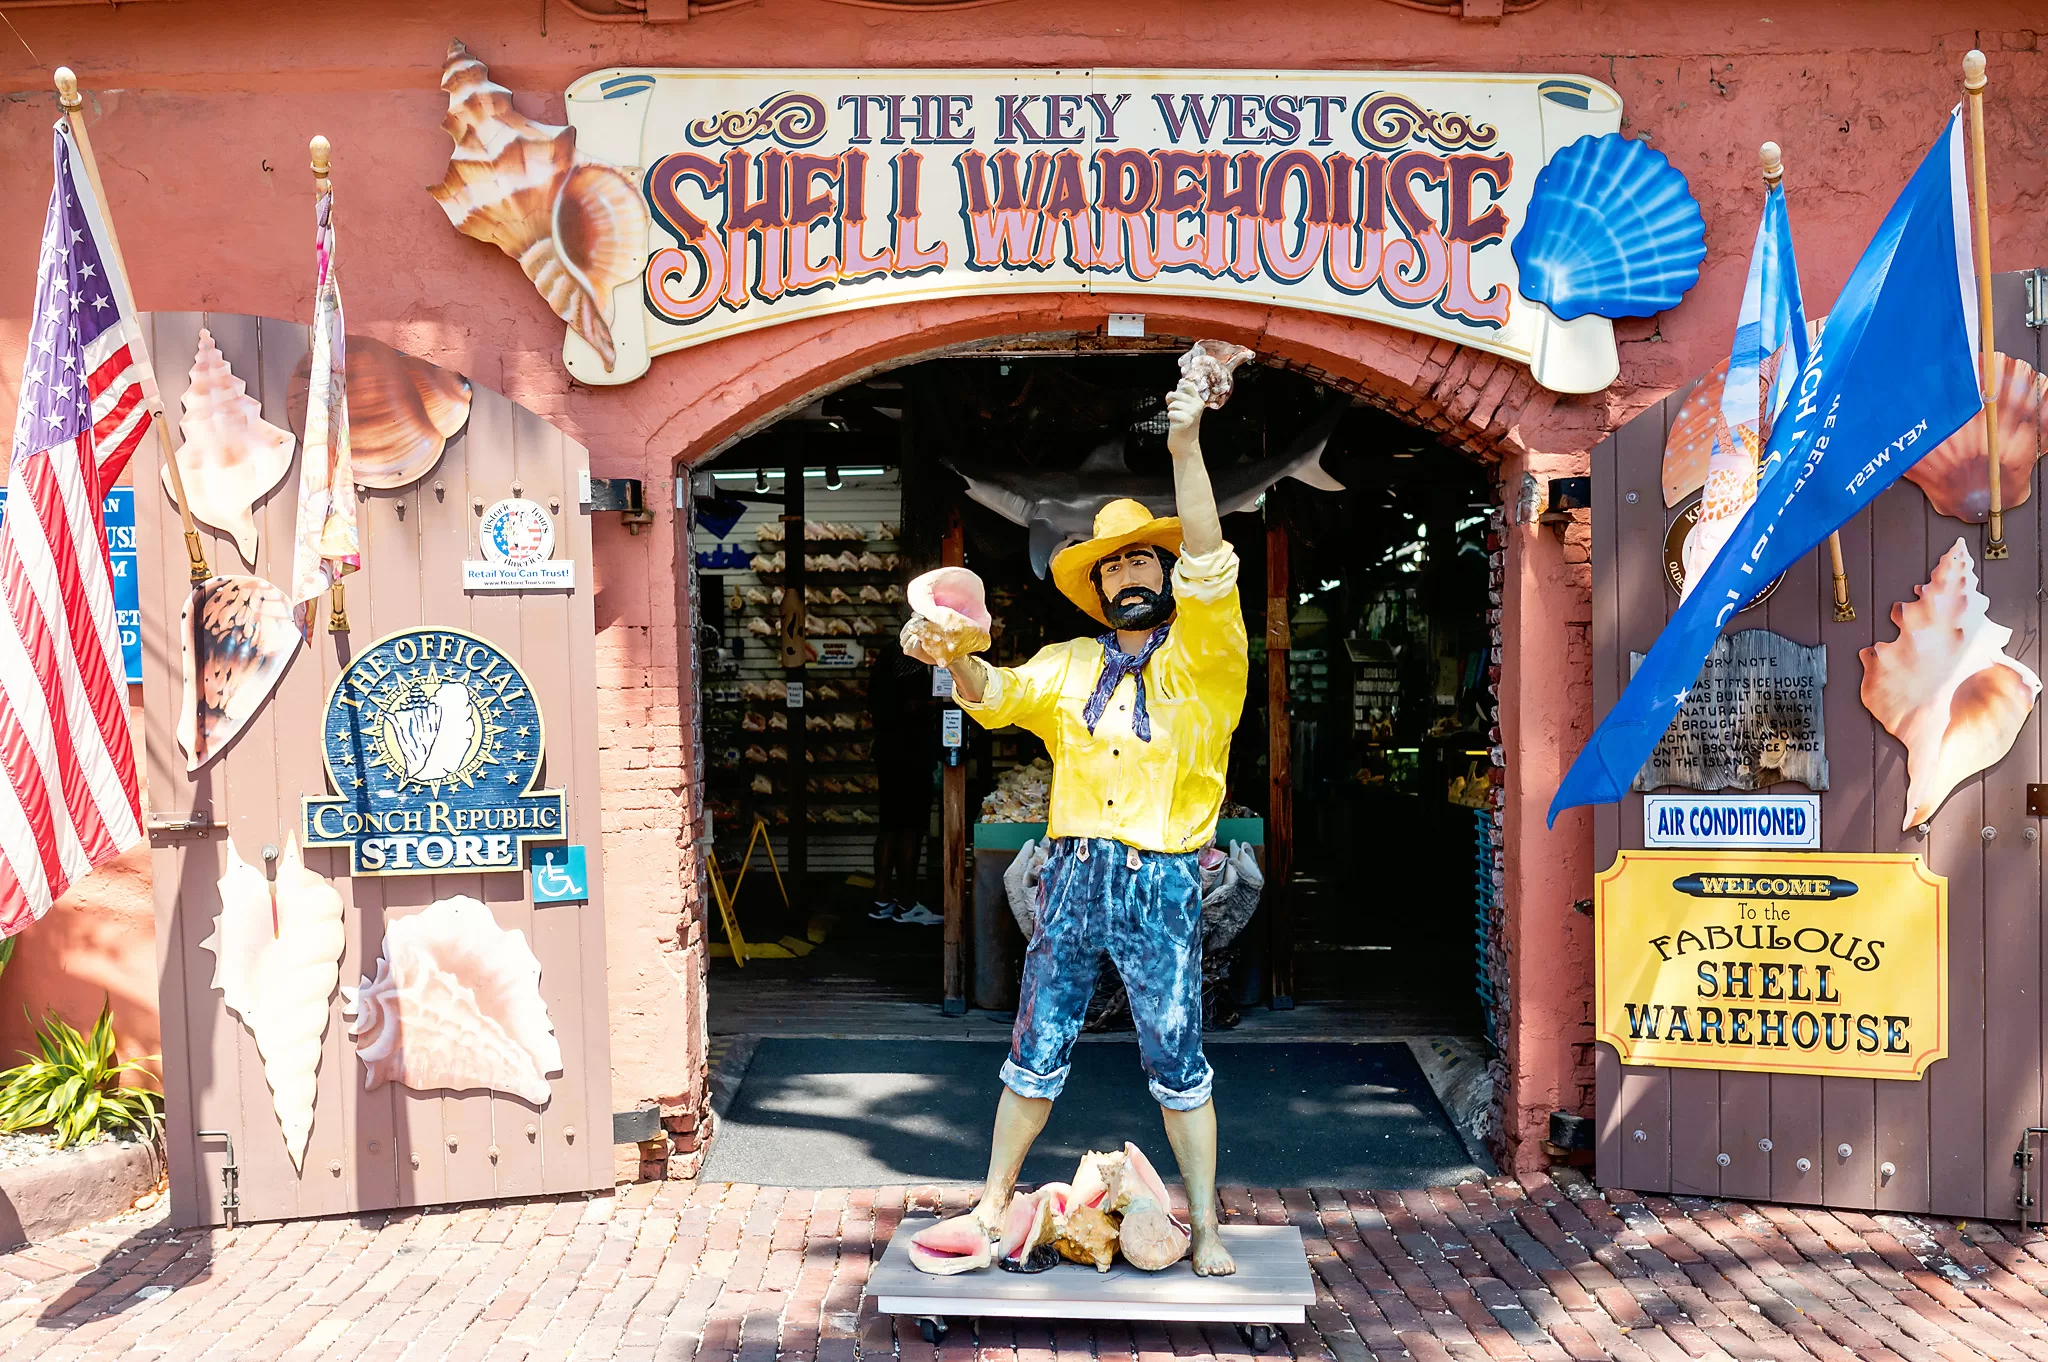 The front entrance to the Key West Shell Warehouse near Mallory Square